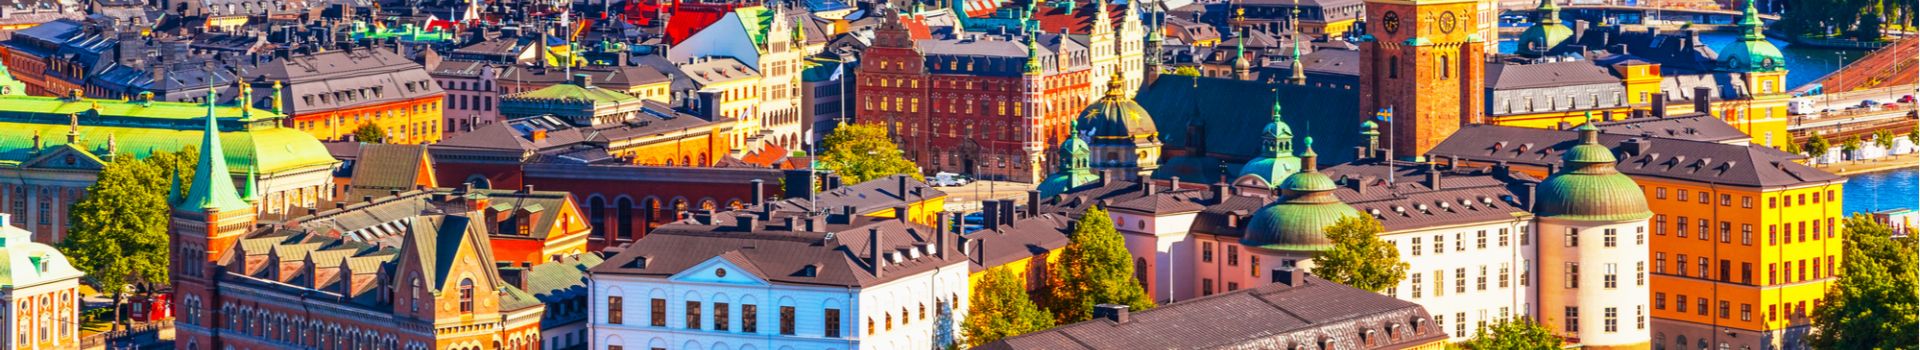 Country Destination Page - Holidays to Sweden - Cassidy Travel